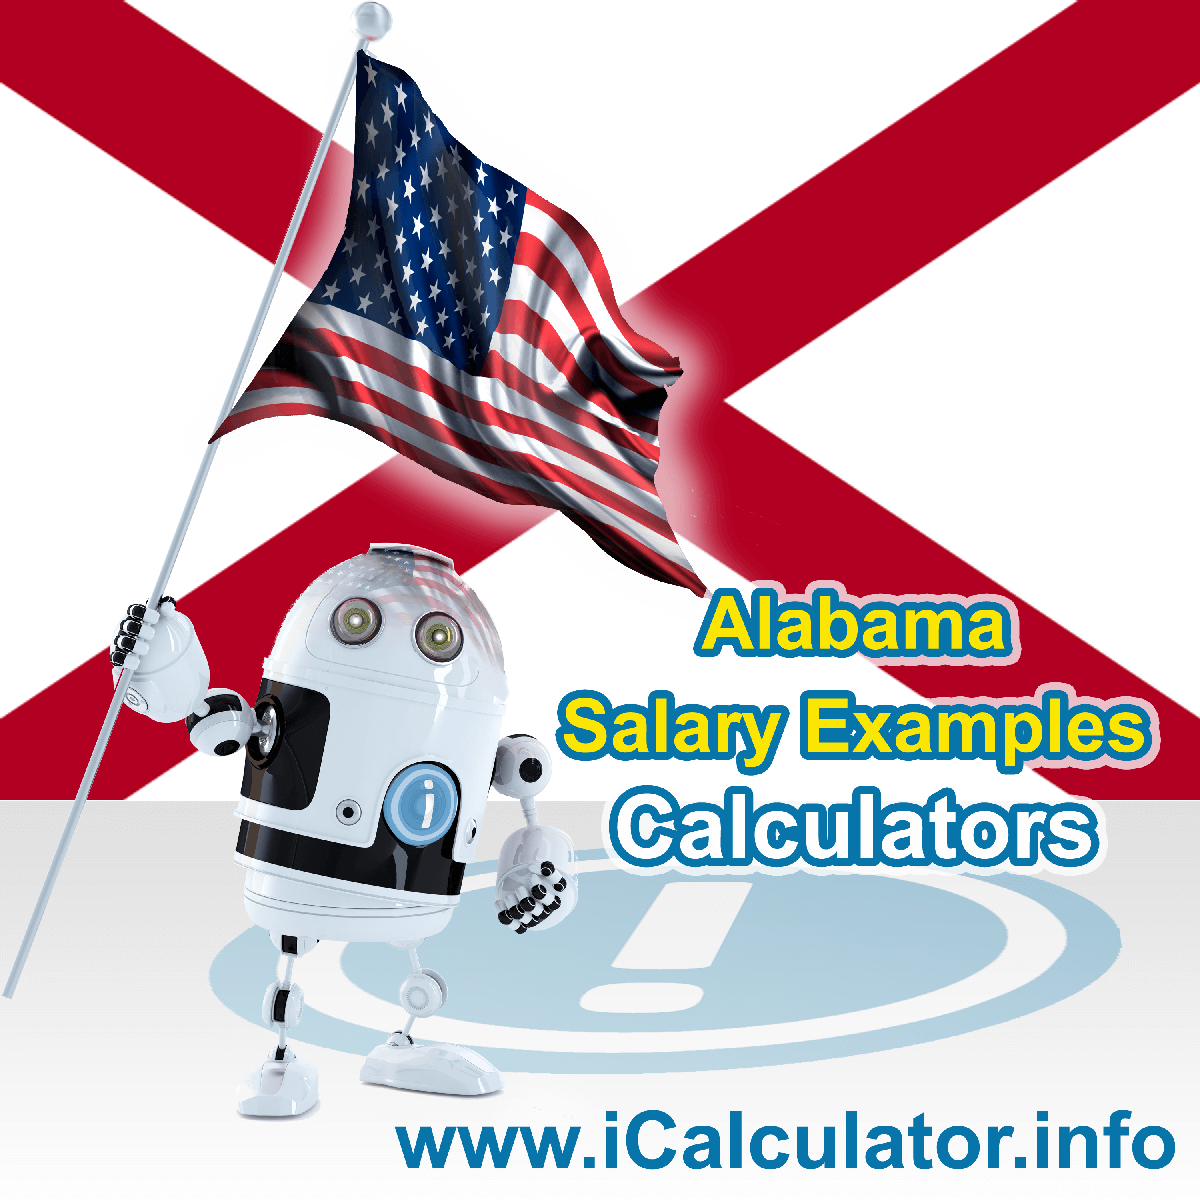 Alabama Salary Example for $ 110,000.00 in 2023 | iCalculator™ | $ 110,000.00 salary example for employee and employer paying Alabama State tincome taxes. Detailed salary after tax calculation including Alabama State Tax, Federal State Tax, Medicare Deductions, Social Security, Capital Gains and other income tax and salary deductions complete with supporting Alabama state tax tables 